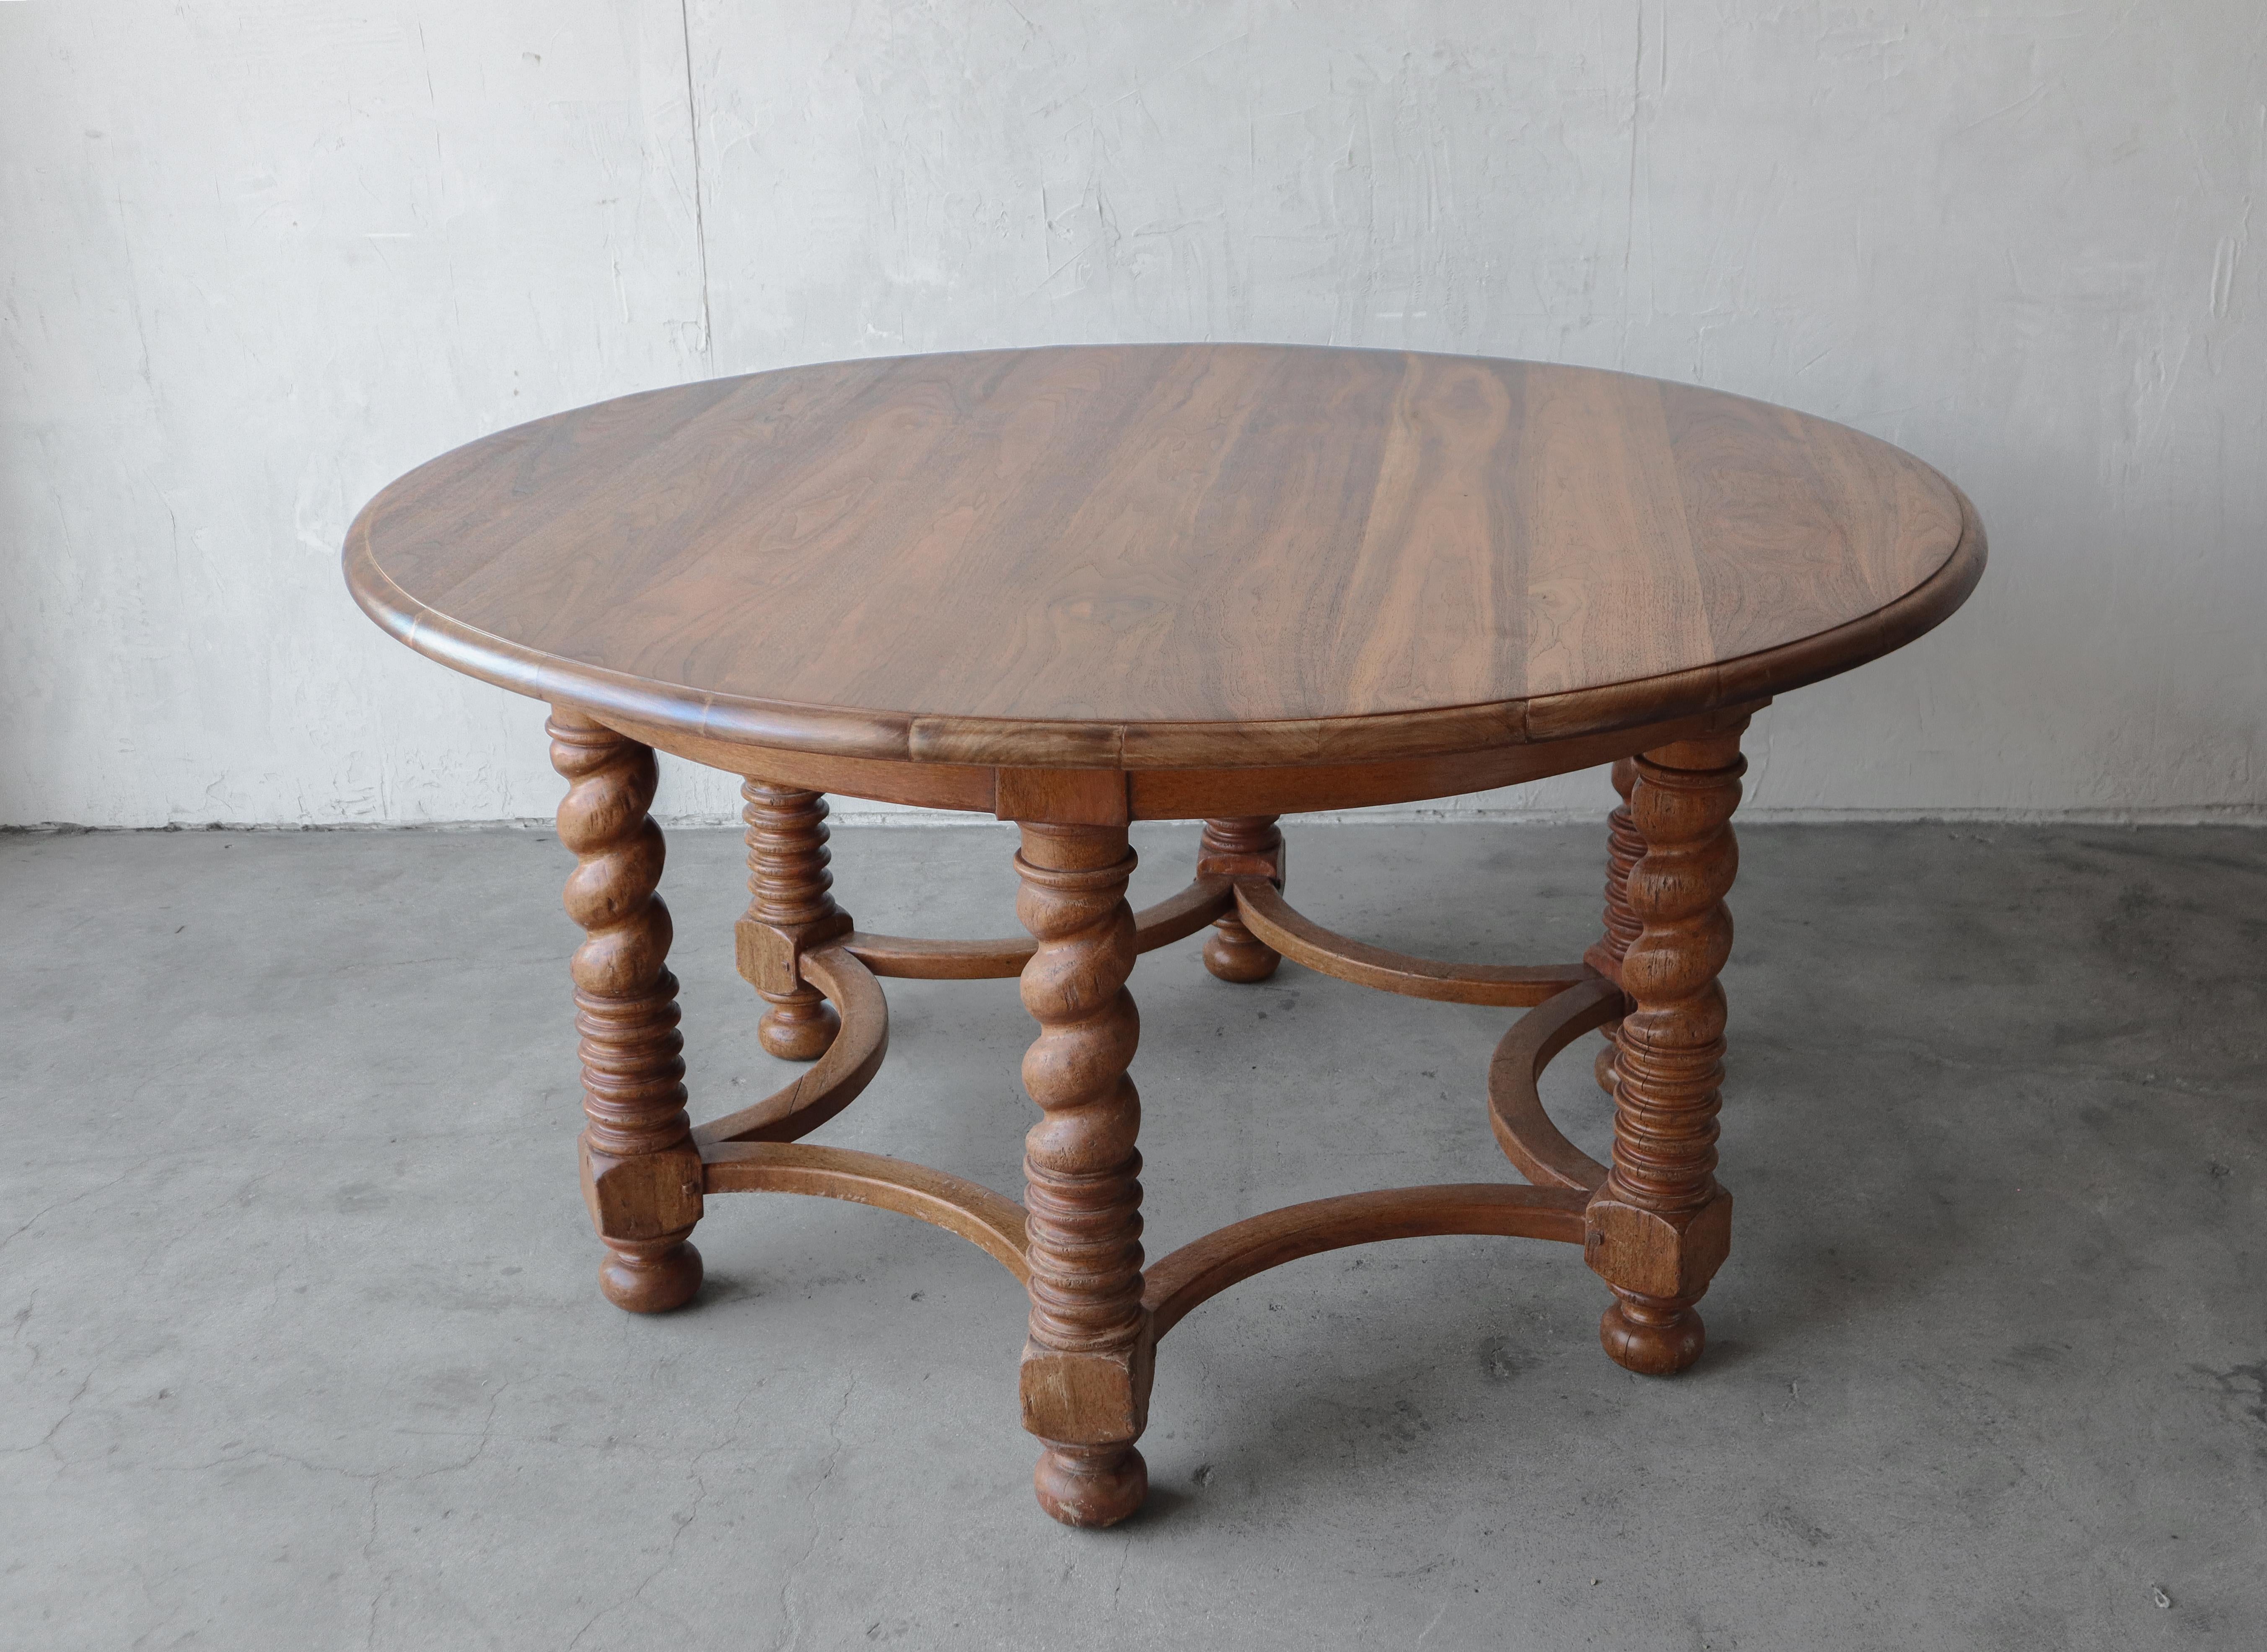 This European beauty is large in size and character.  This grand table features a large round top supported by six barley twist style legs connected by a rare rounded trestle base. The walnut top is beautiful and smooth contrasted by a more